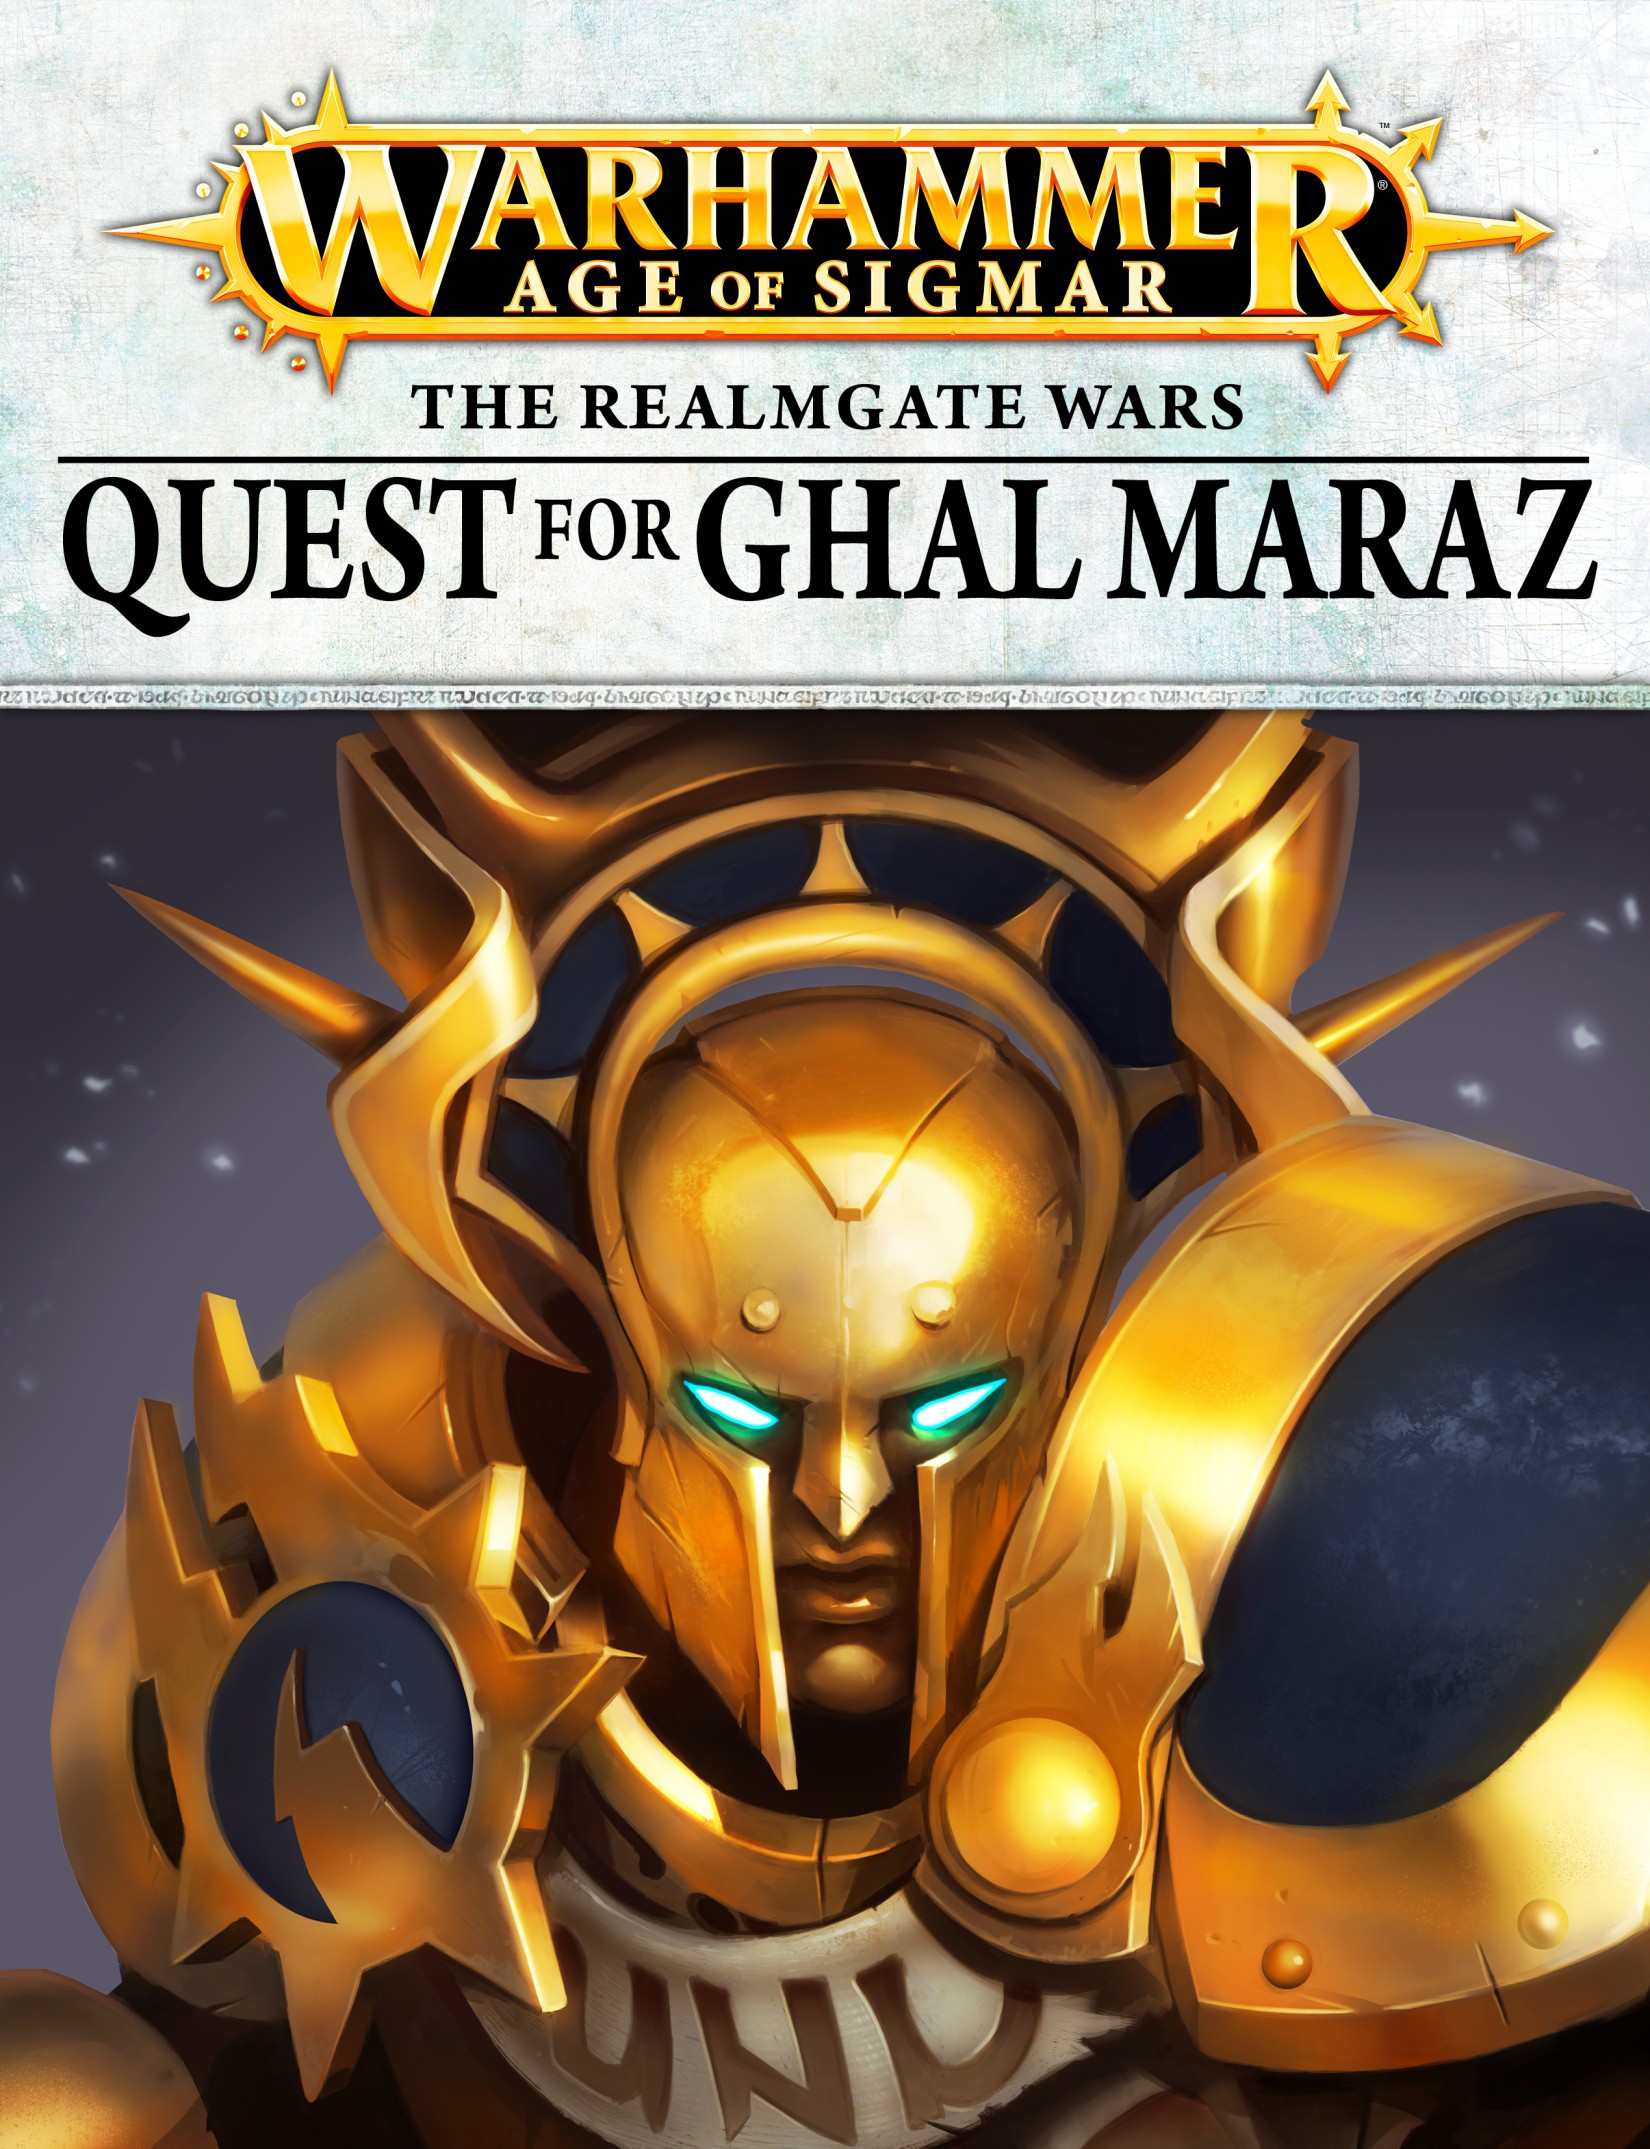 Warhammer Age of Sigmar - The Realmgate Wars: Quest for Ghal Maraz